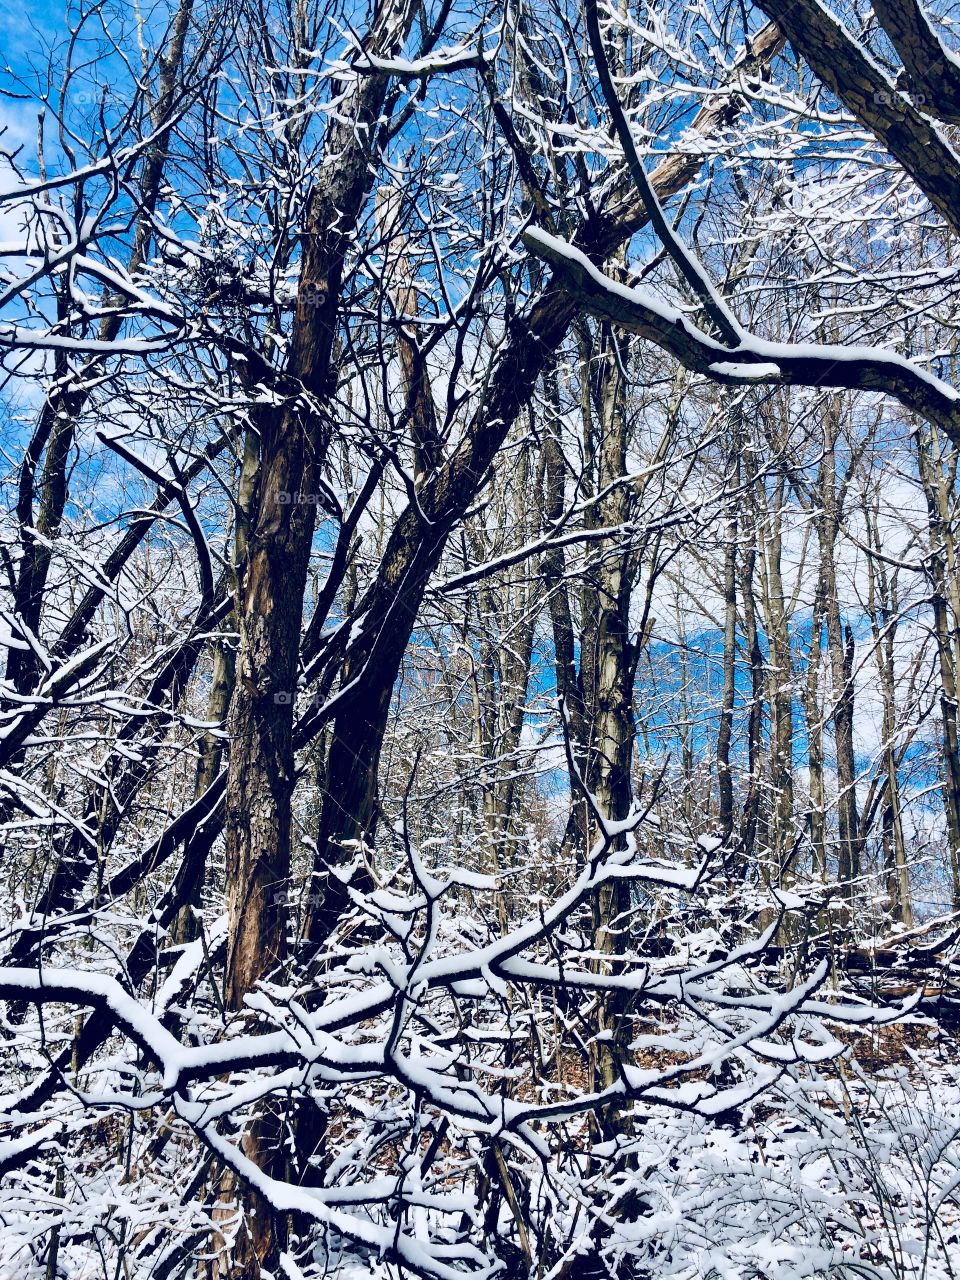 The woods, snowy April 